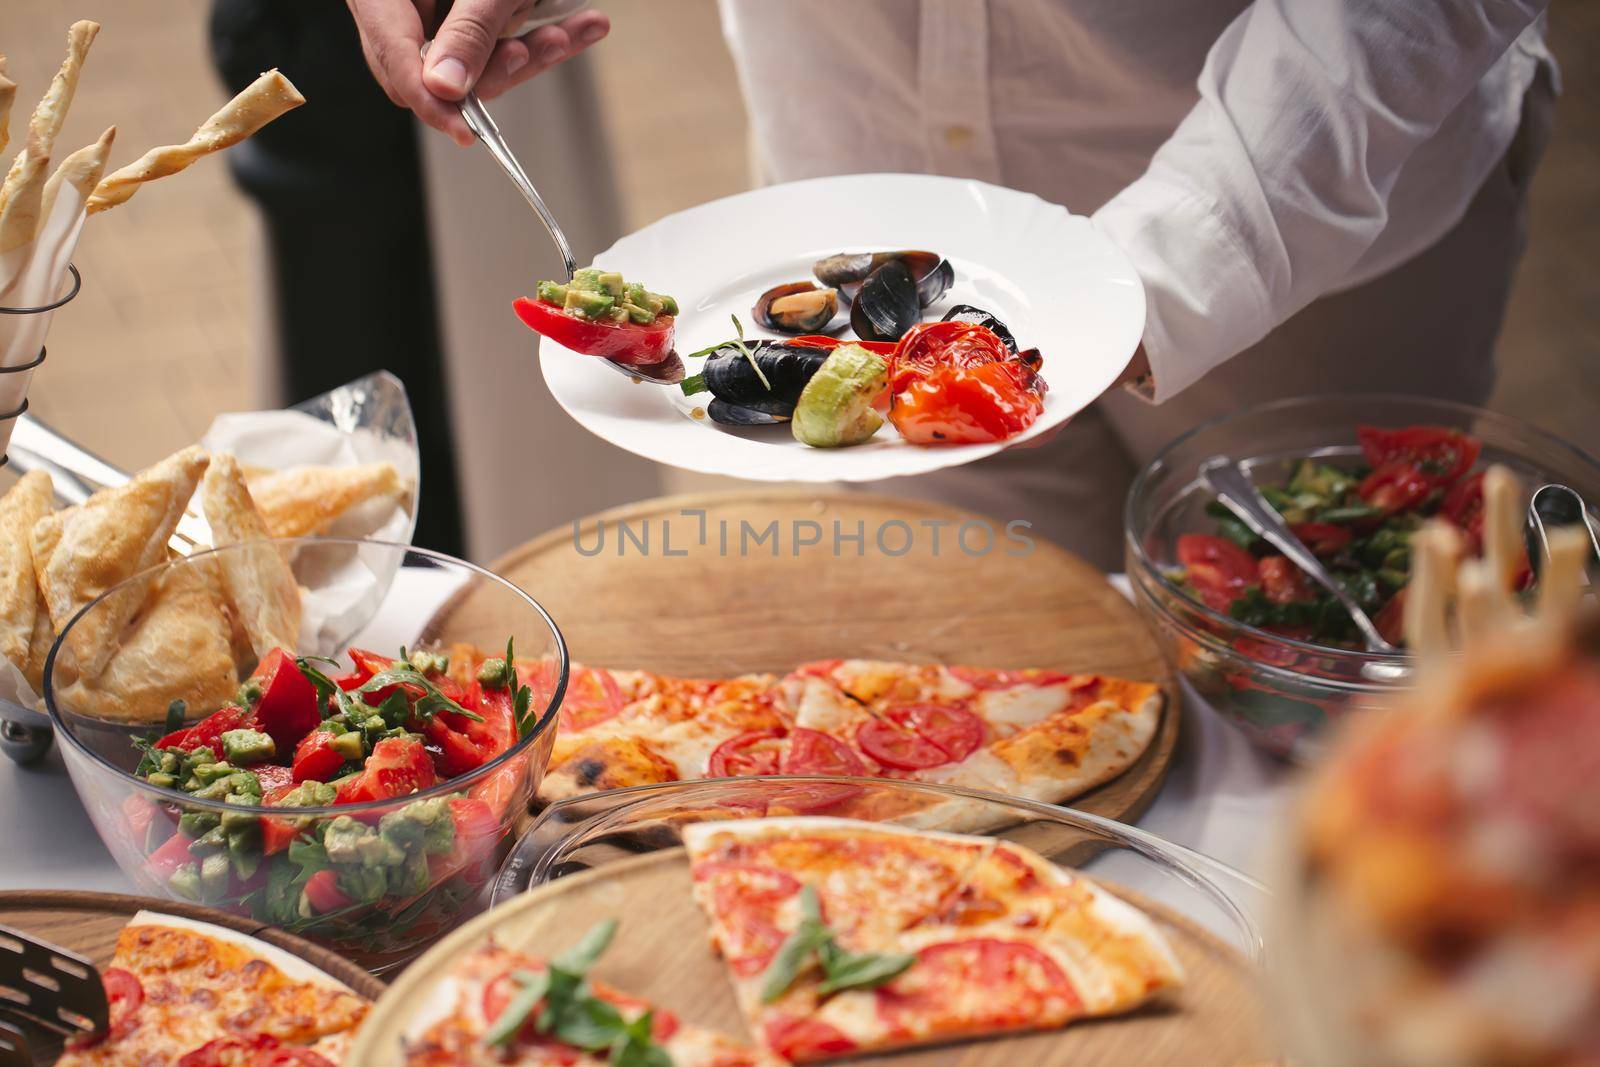 Self-service at the buffet. A variety of pizza and salads.